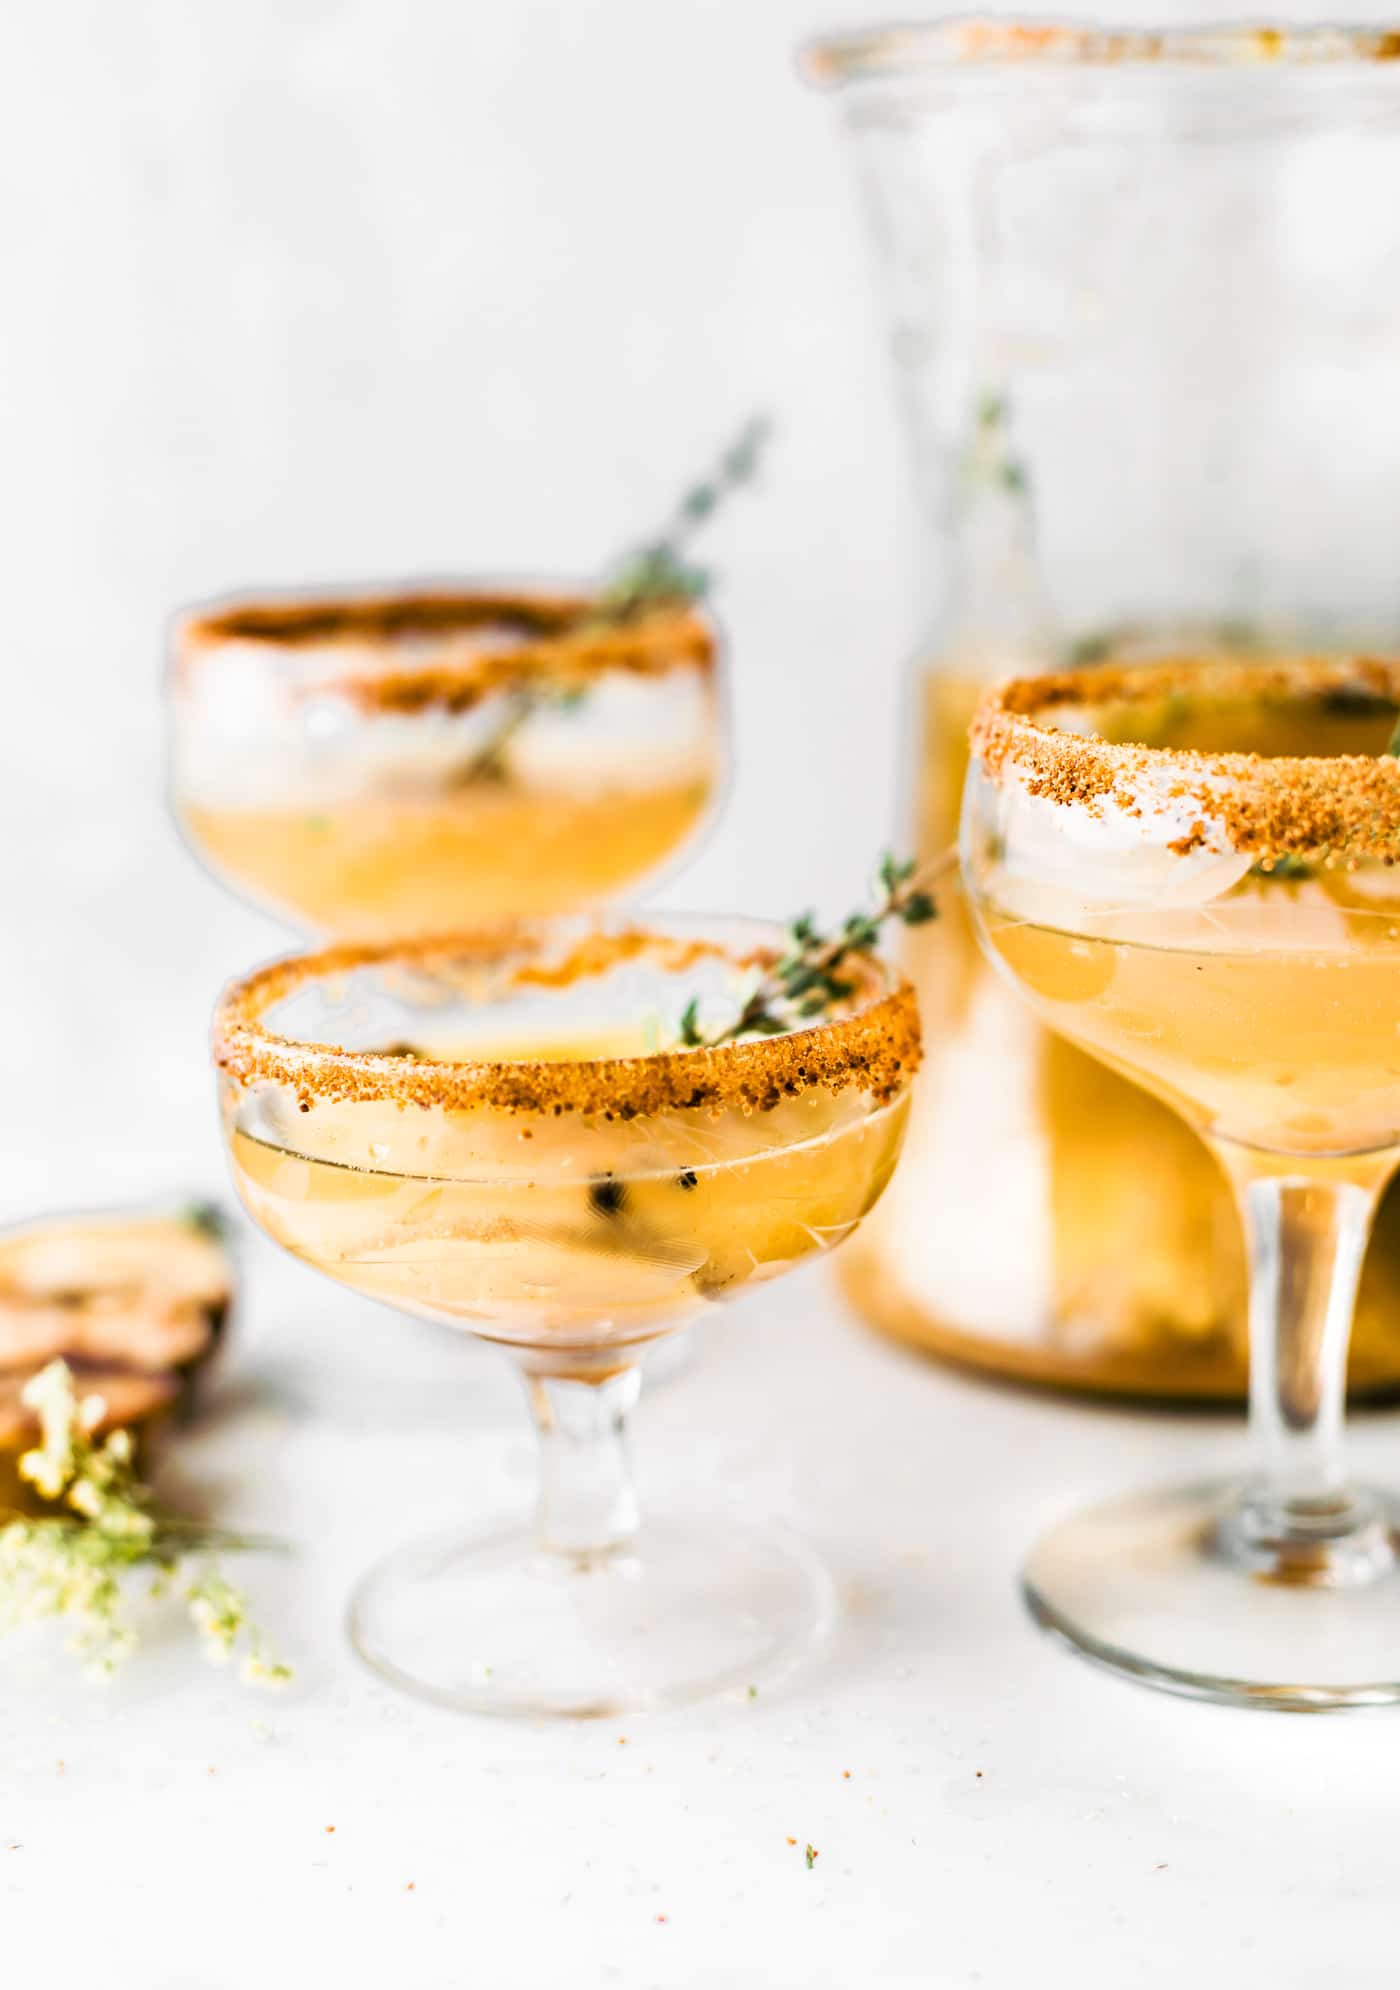 Celebrate the season with these Honey Roasted Pear Sparkling Cocktails and Mocktails! The easiest festive cocktails made with sparkling wine, champagne, or grapefruit juice, then blended with a honey roasted pear puree, honey, cinnamon and nutmeg, and a touch of vanilla! Simple, light, delicious.